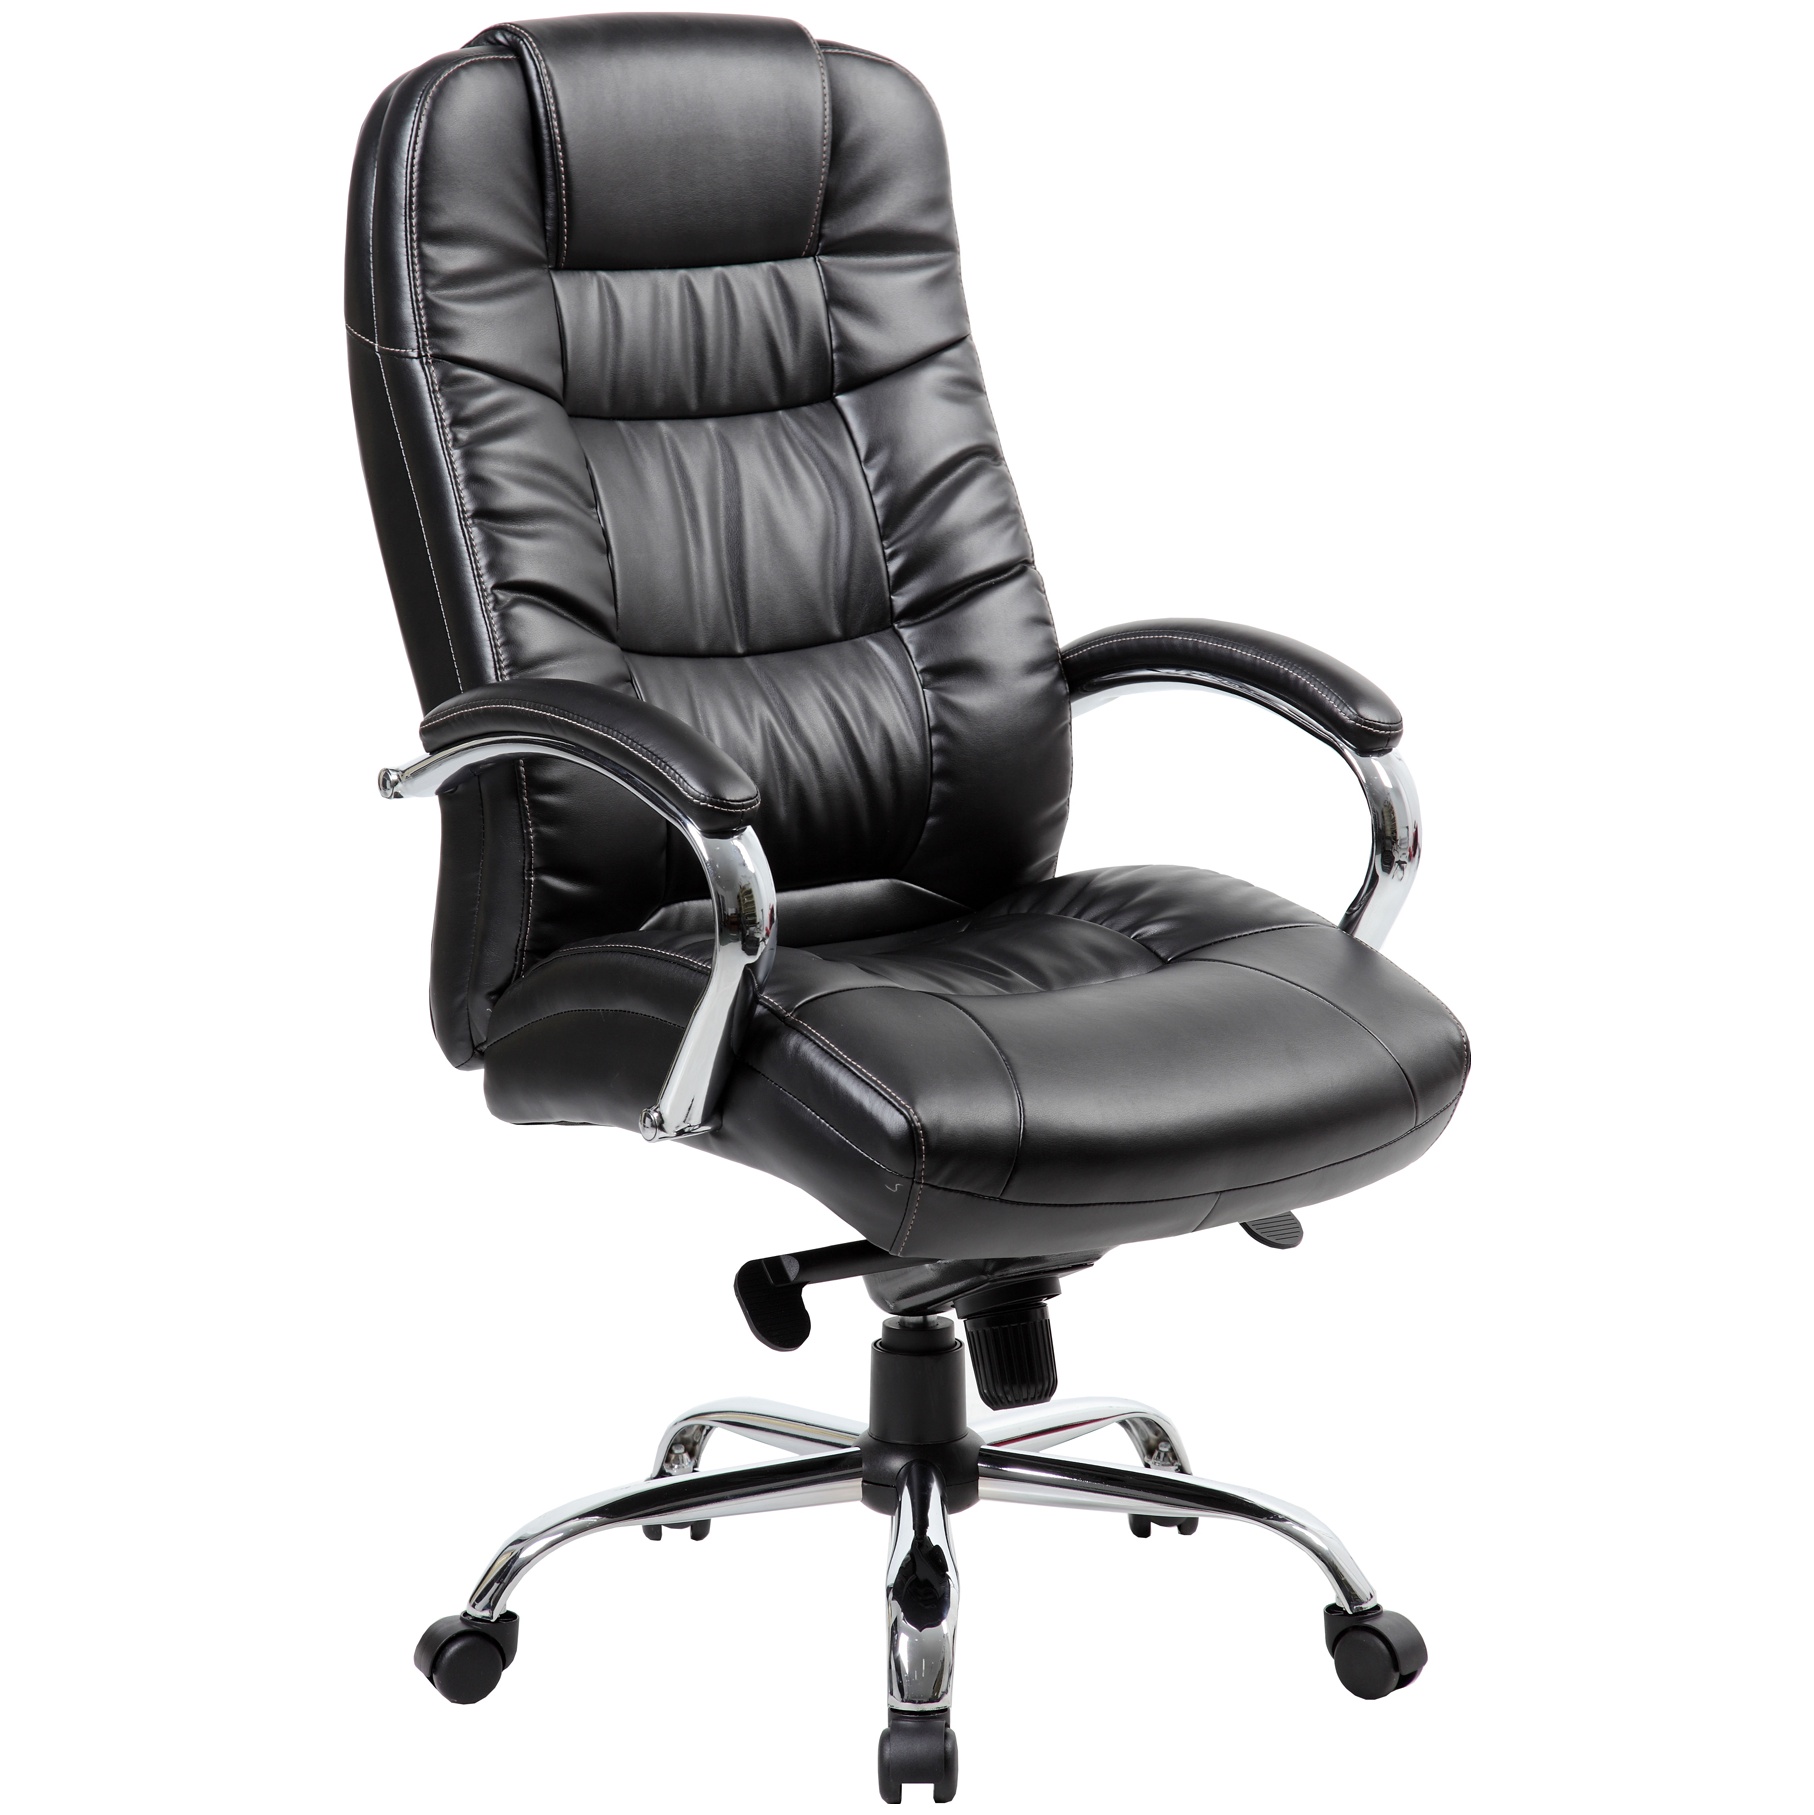 Verona Executive Leather Office Chairs, Leather Executive Office Chairs Uk